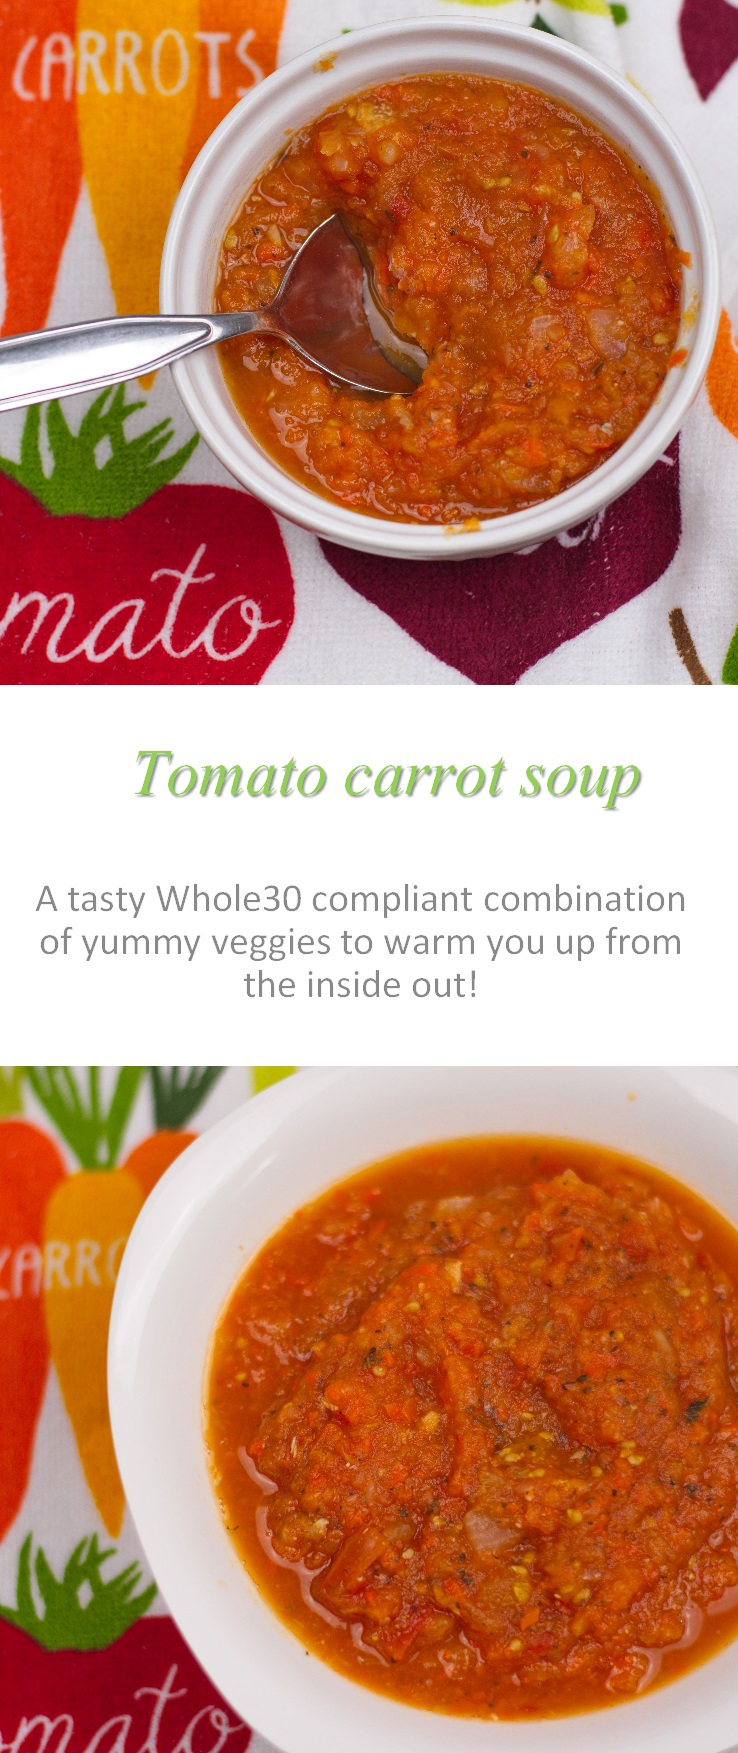 What's more comforting than tomato soup on a cold winter's day?  Add some carrots and make this tomato carrot soup! #soup